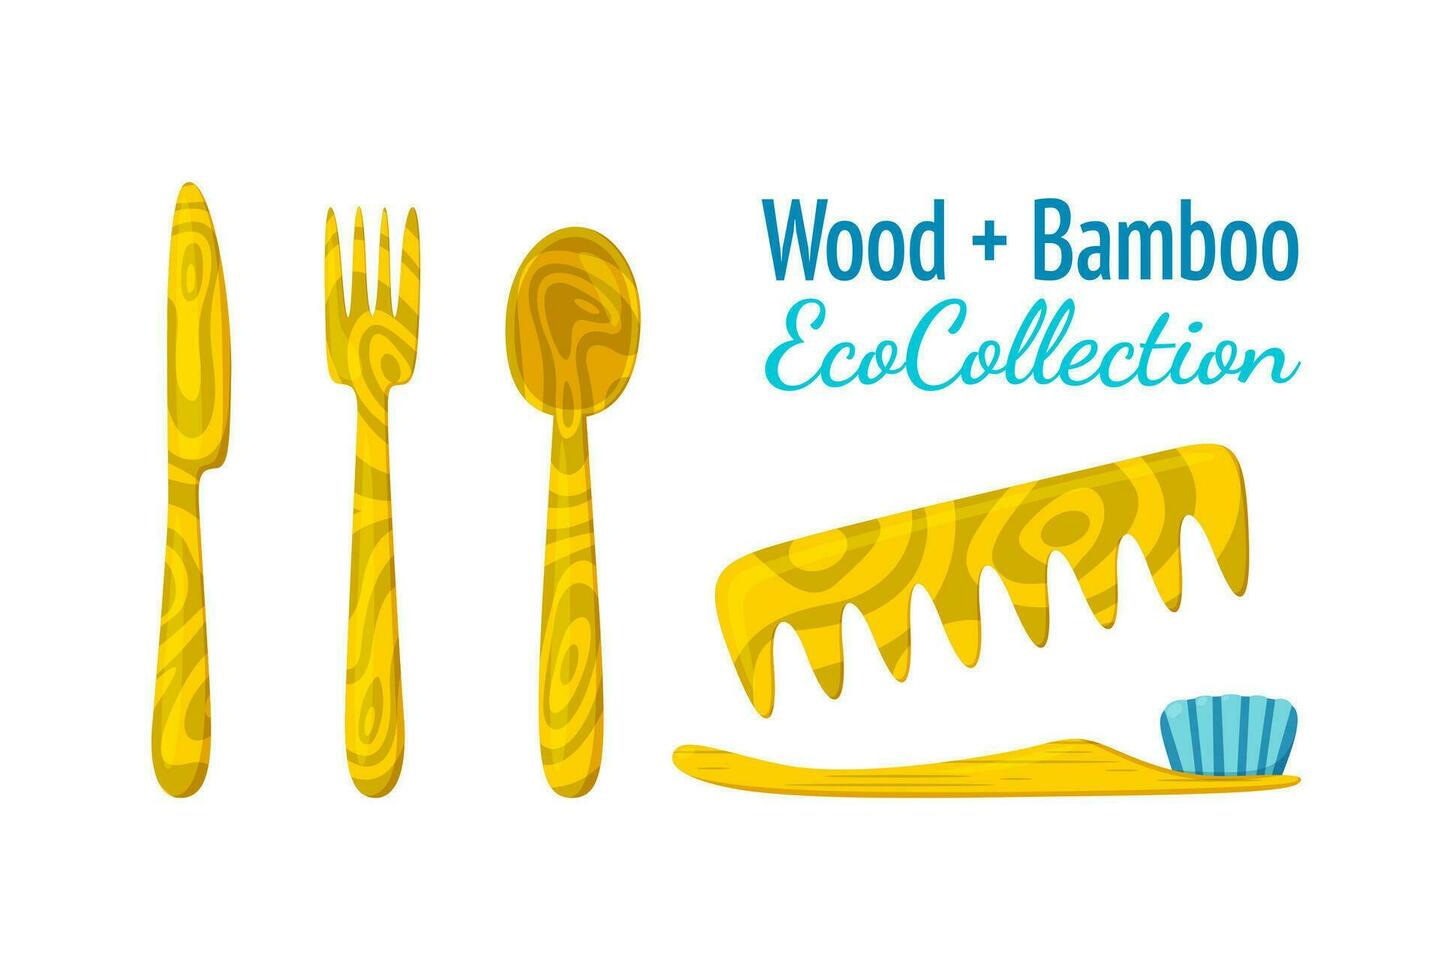 Wood and bamboo eco collection. Ecological substitute for plastic cultery, comb and toothbrush. Vector illustration